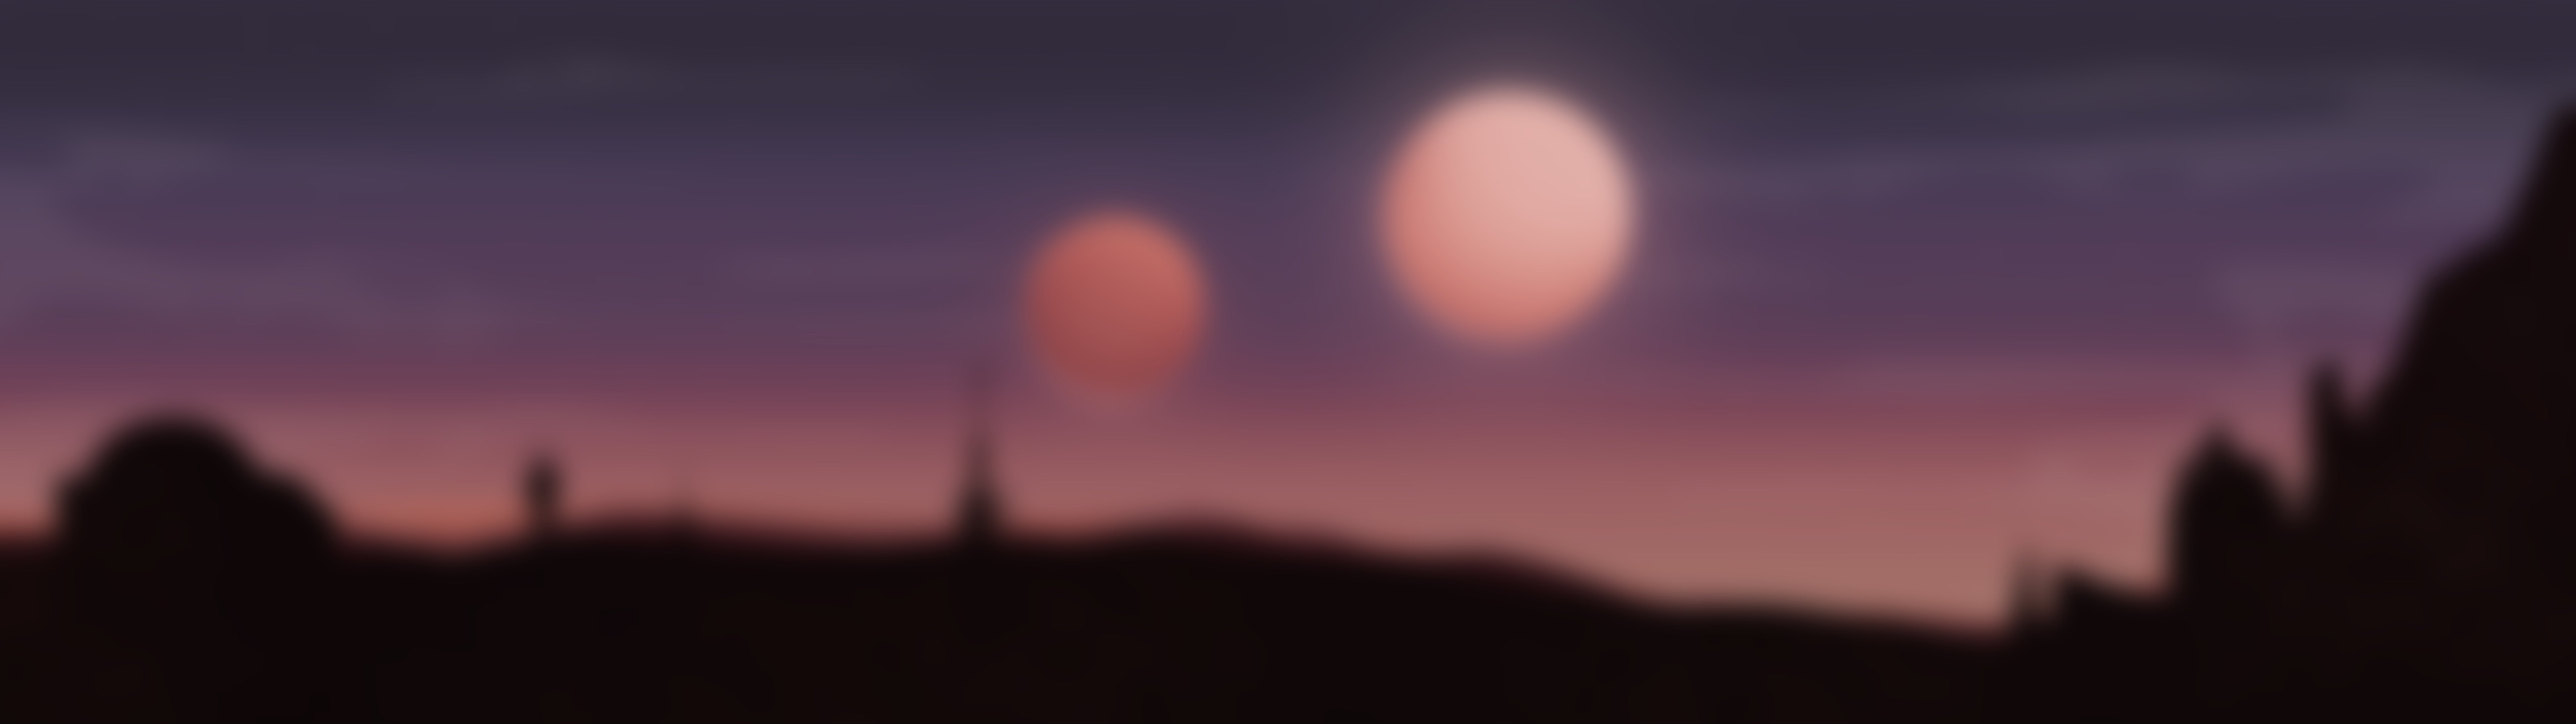 Spoilers Dual Monitor Background Of The Binary Sunsets. Original By U Shoben